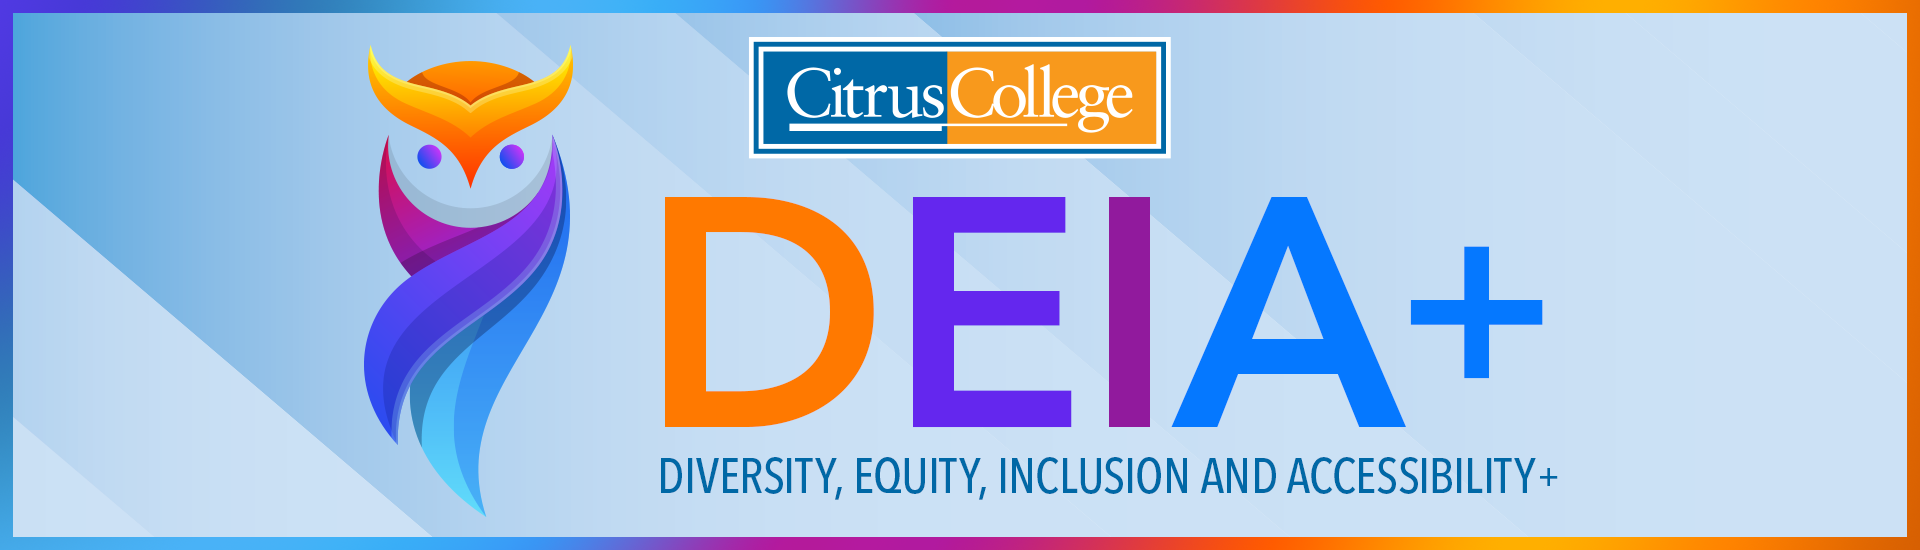 graphic banner image of stylized owl and the words DEIA+ Diversity, Equity, Inclusion and Accessibility+